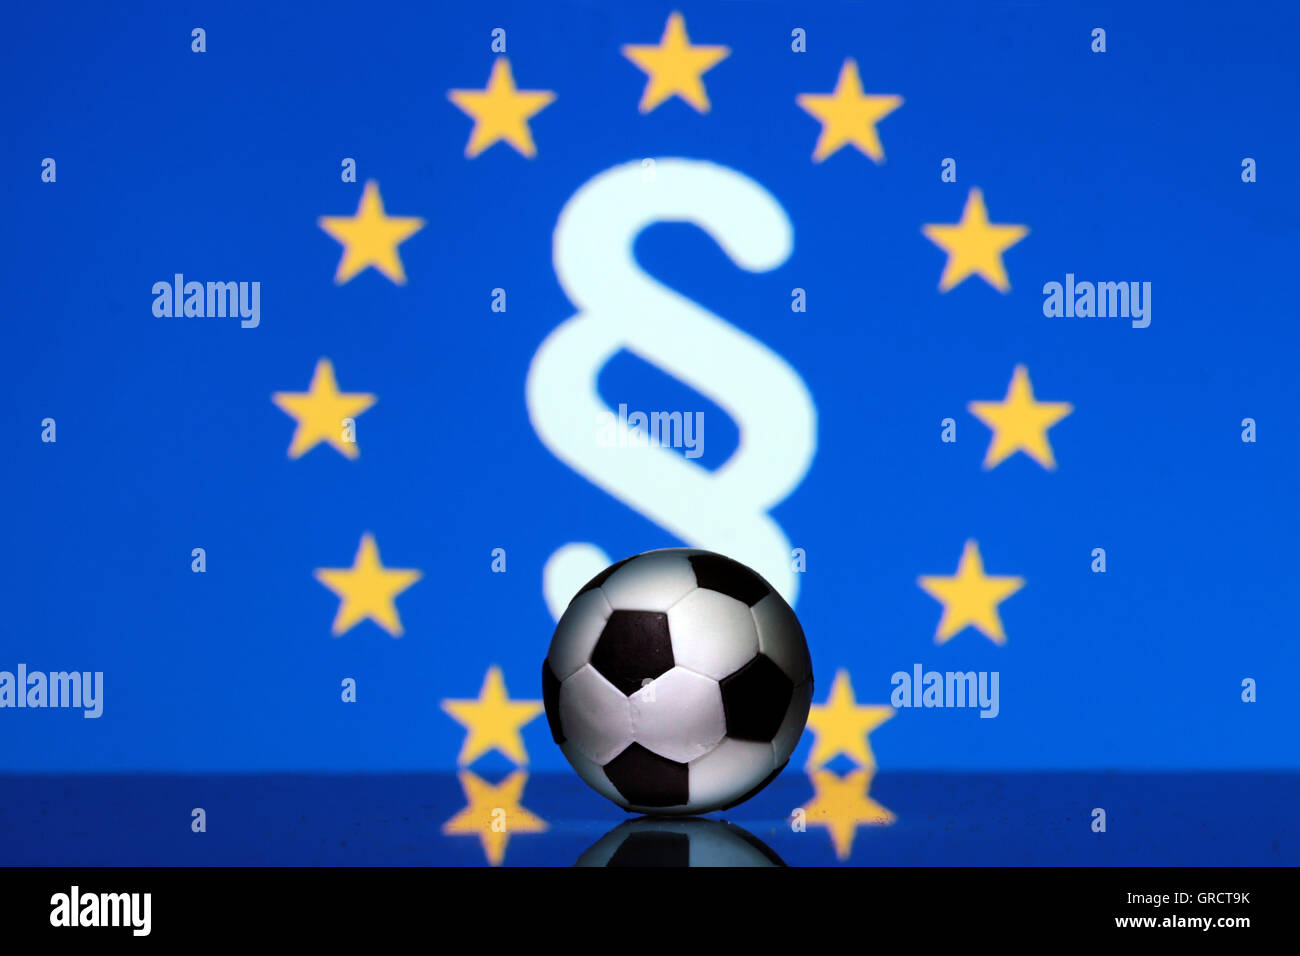 Soccer Ball With Eu Flag And Paragraph Sign Stock Photo